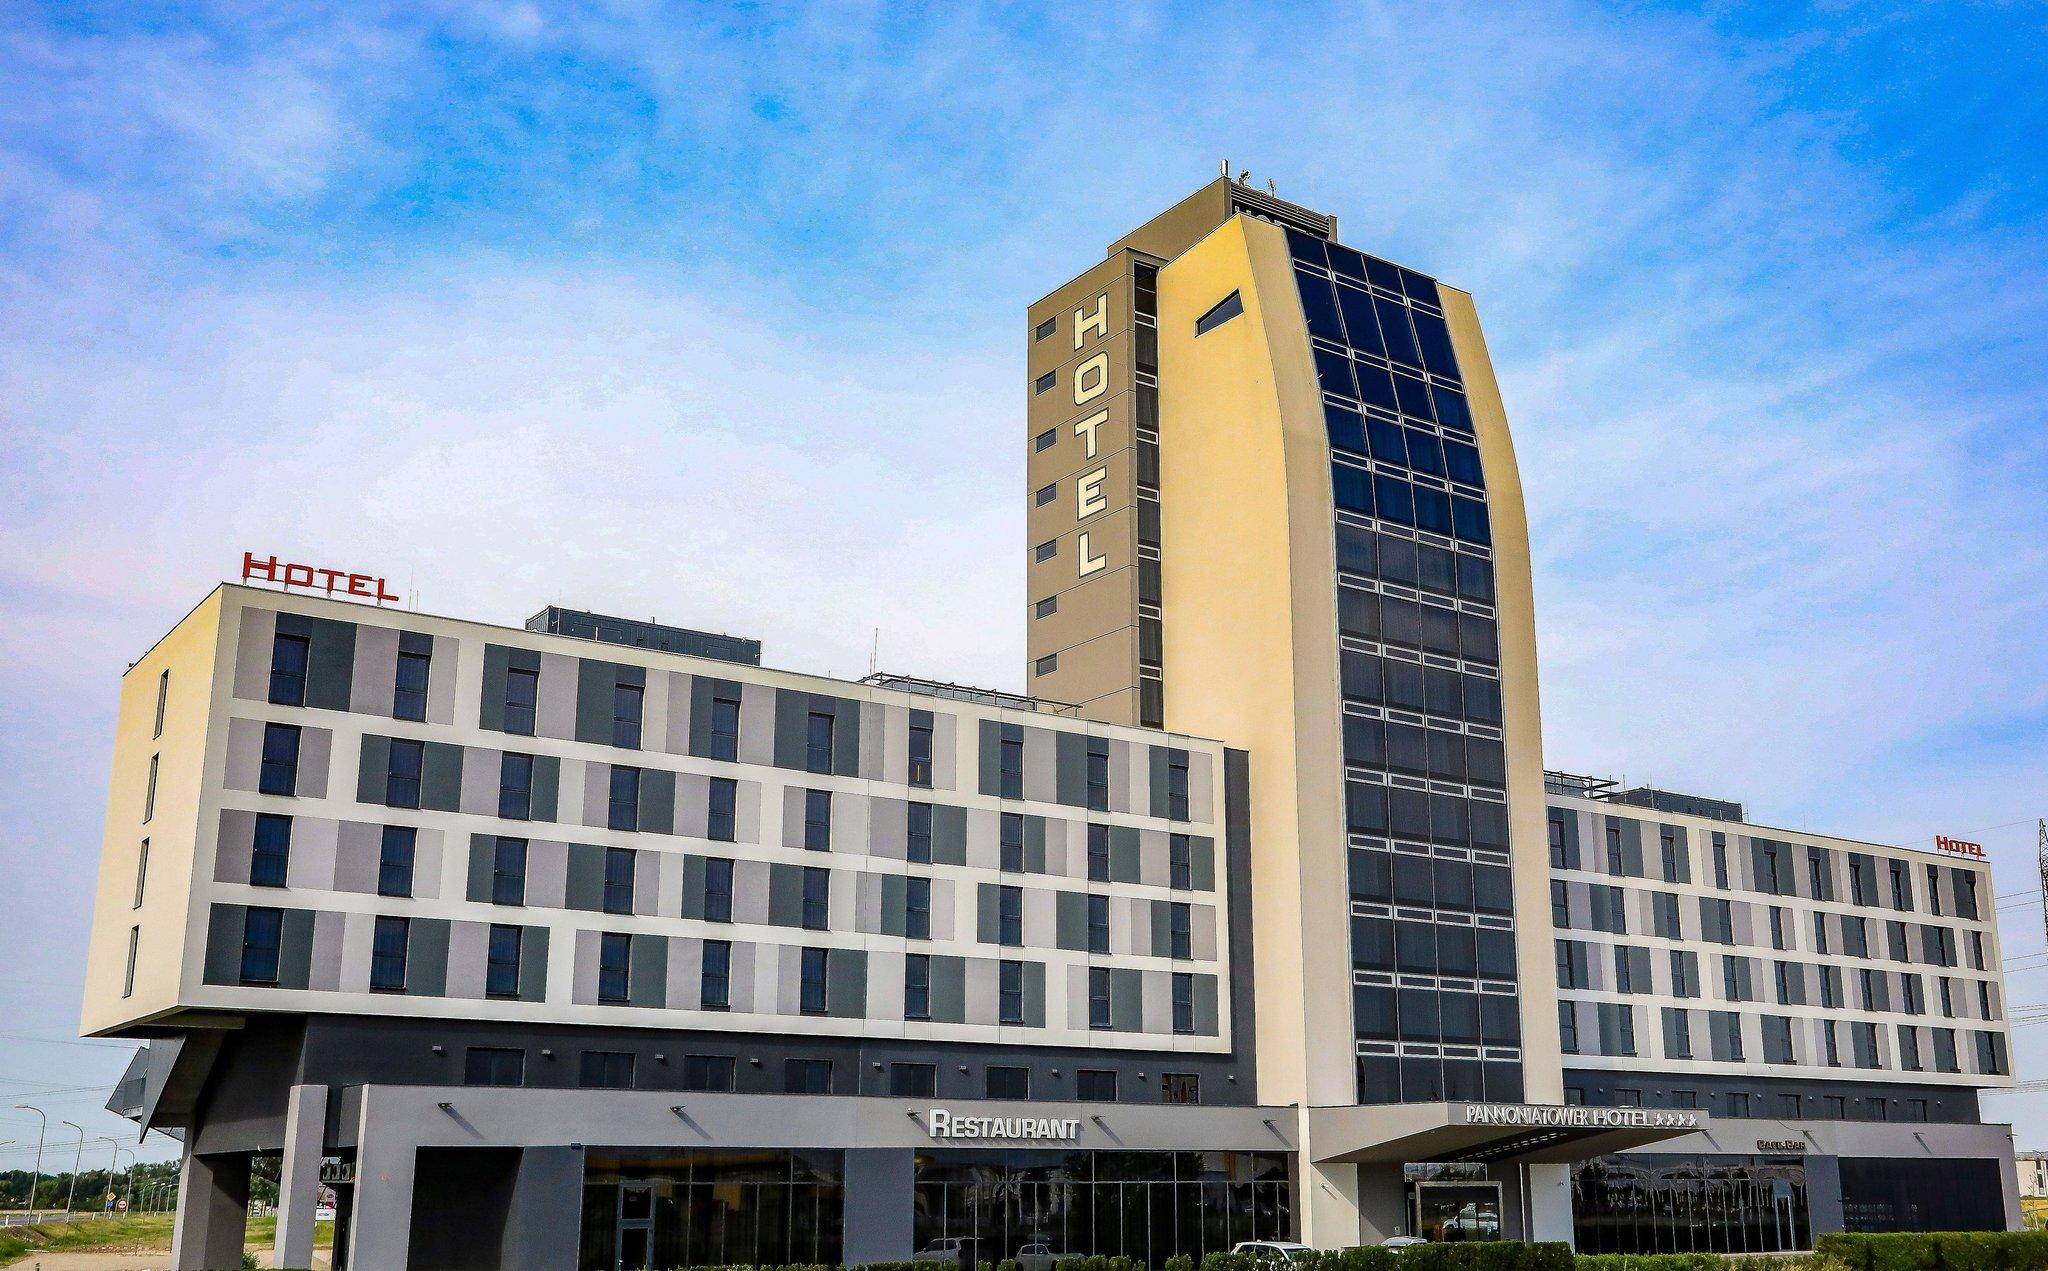 Pannonia Tower Hotel in Parndorf, AT